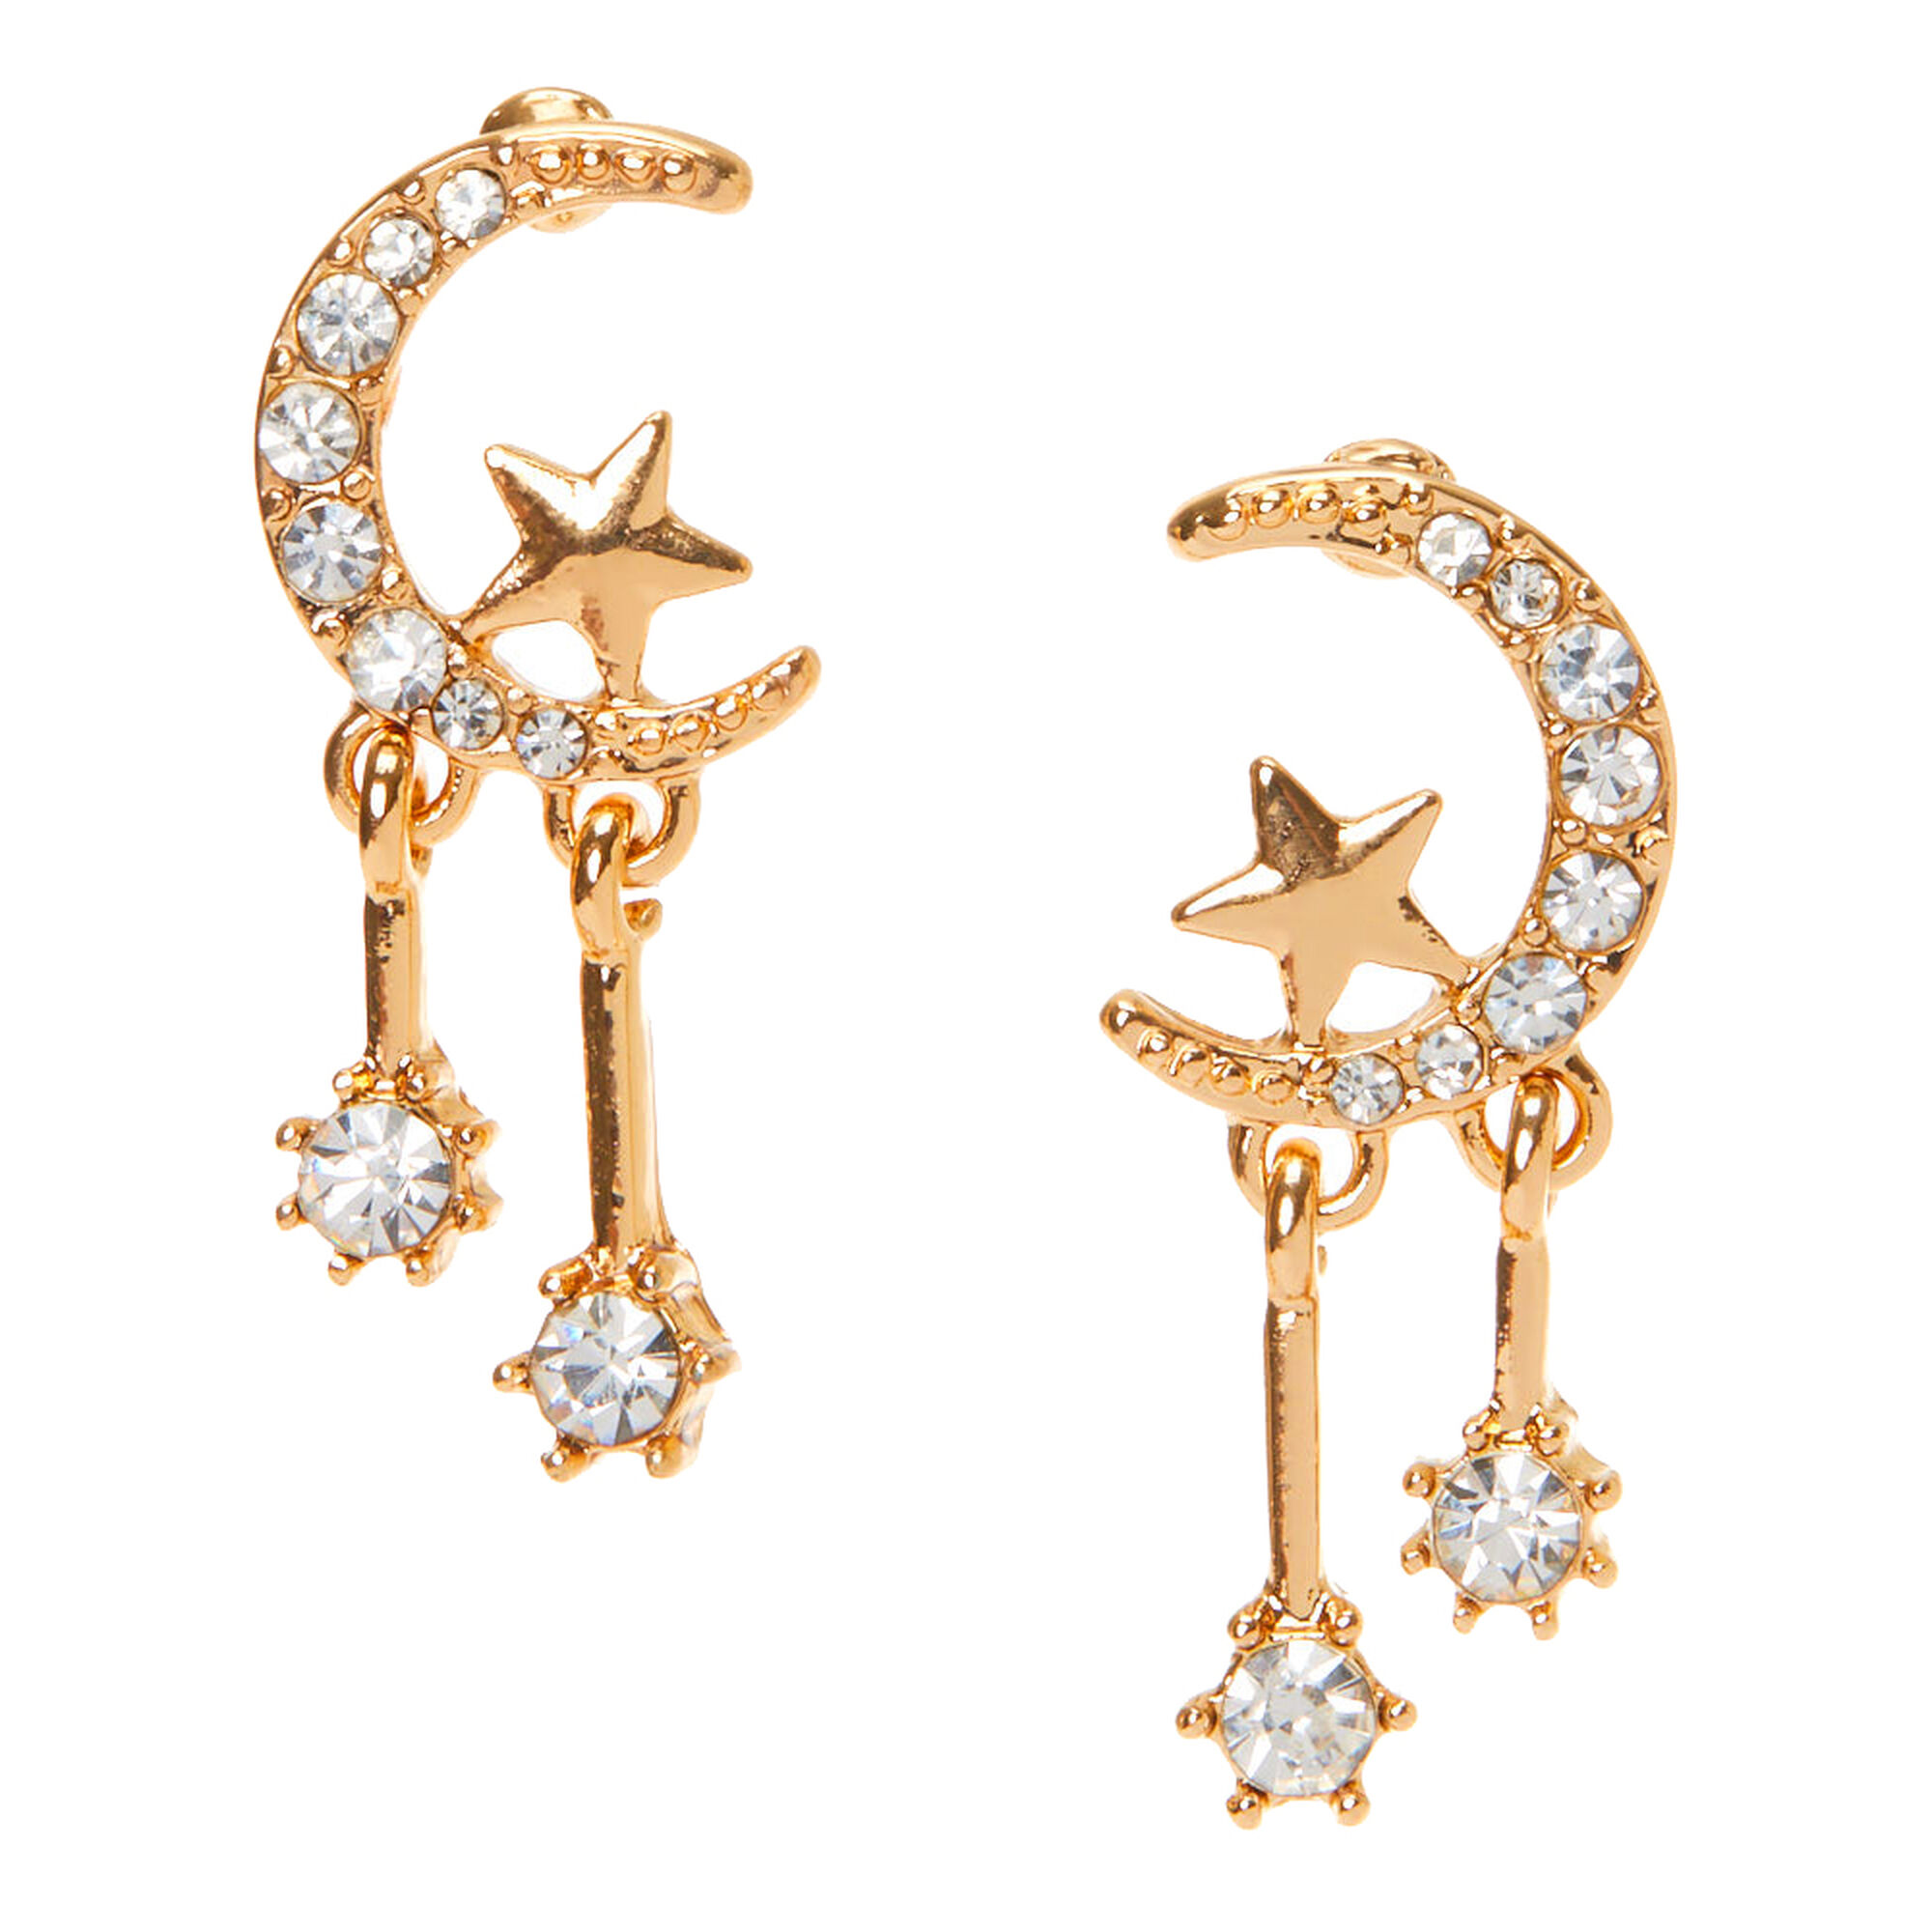 View Claires Tone 1 Celestial Drop Earrings Gold information